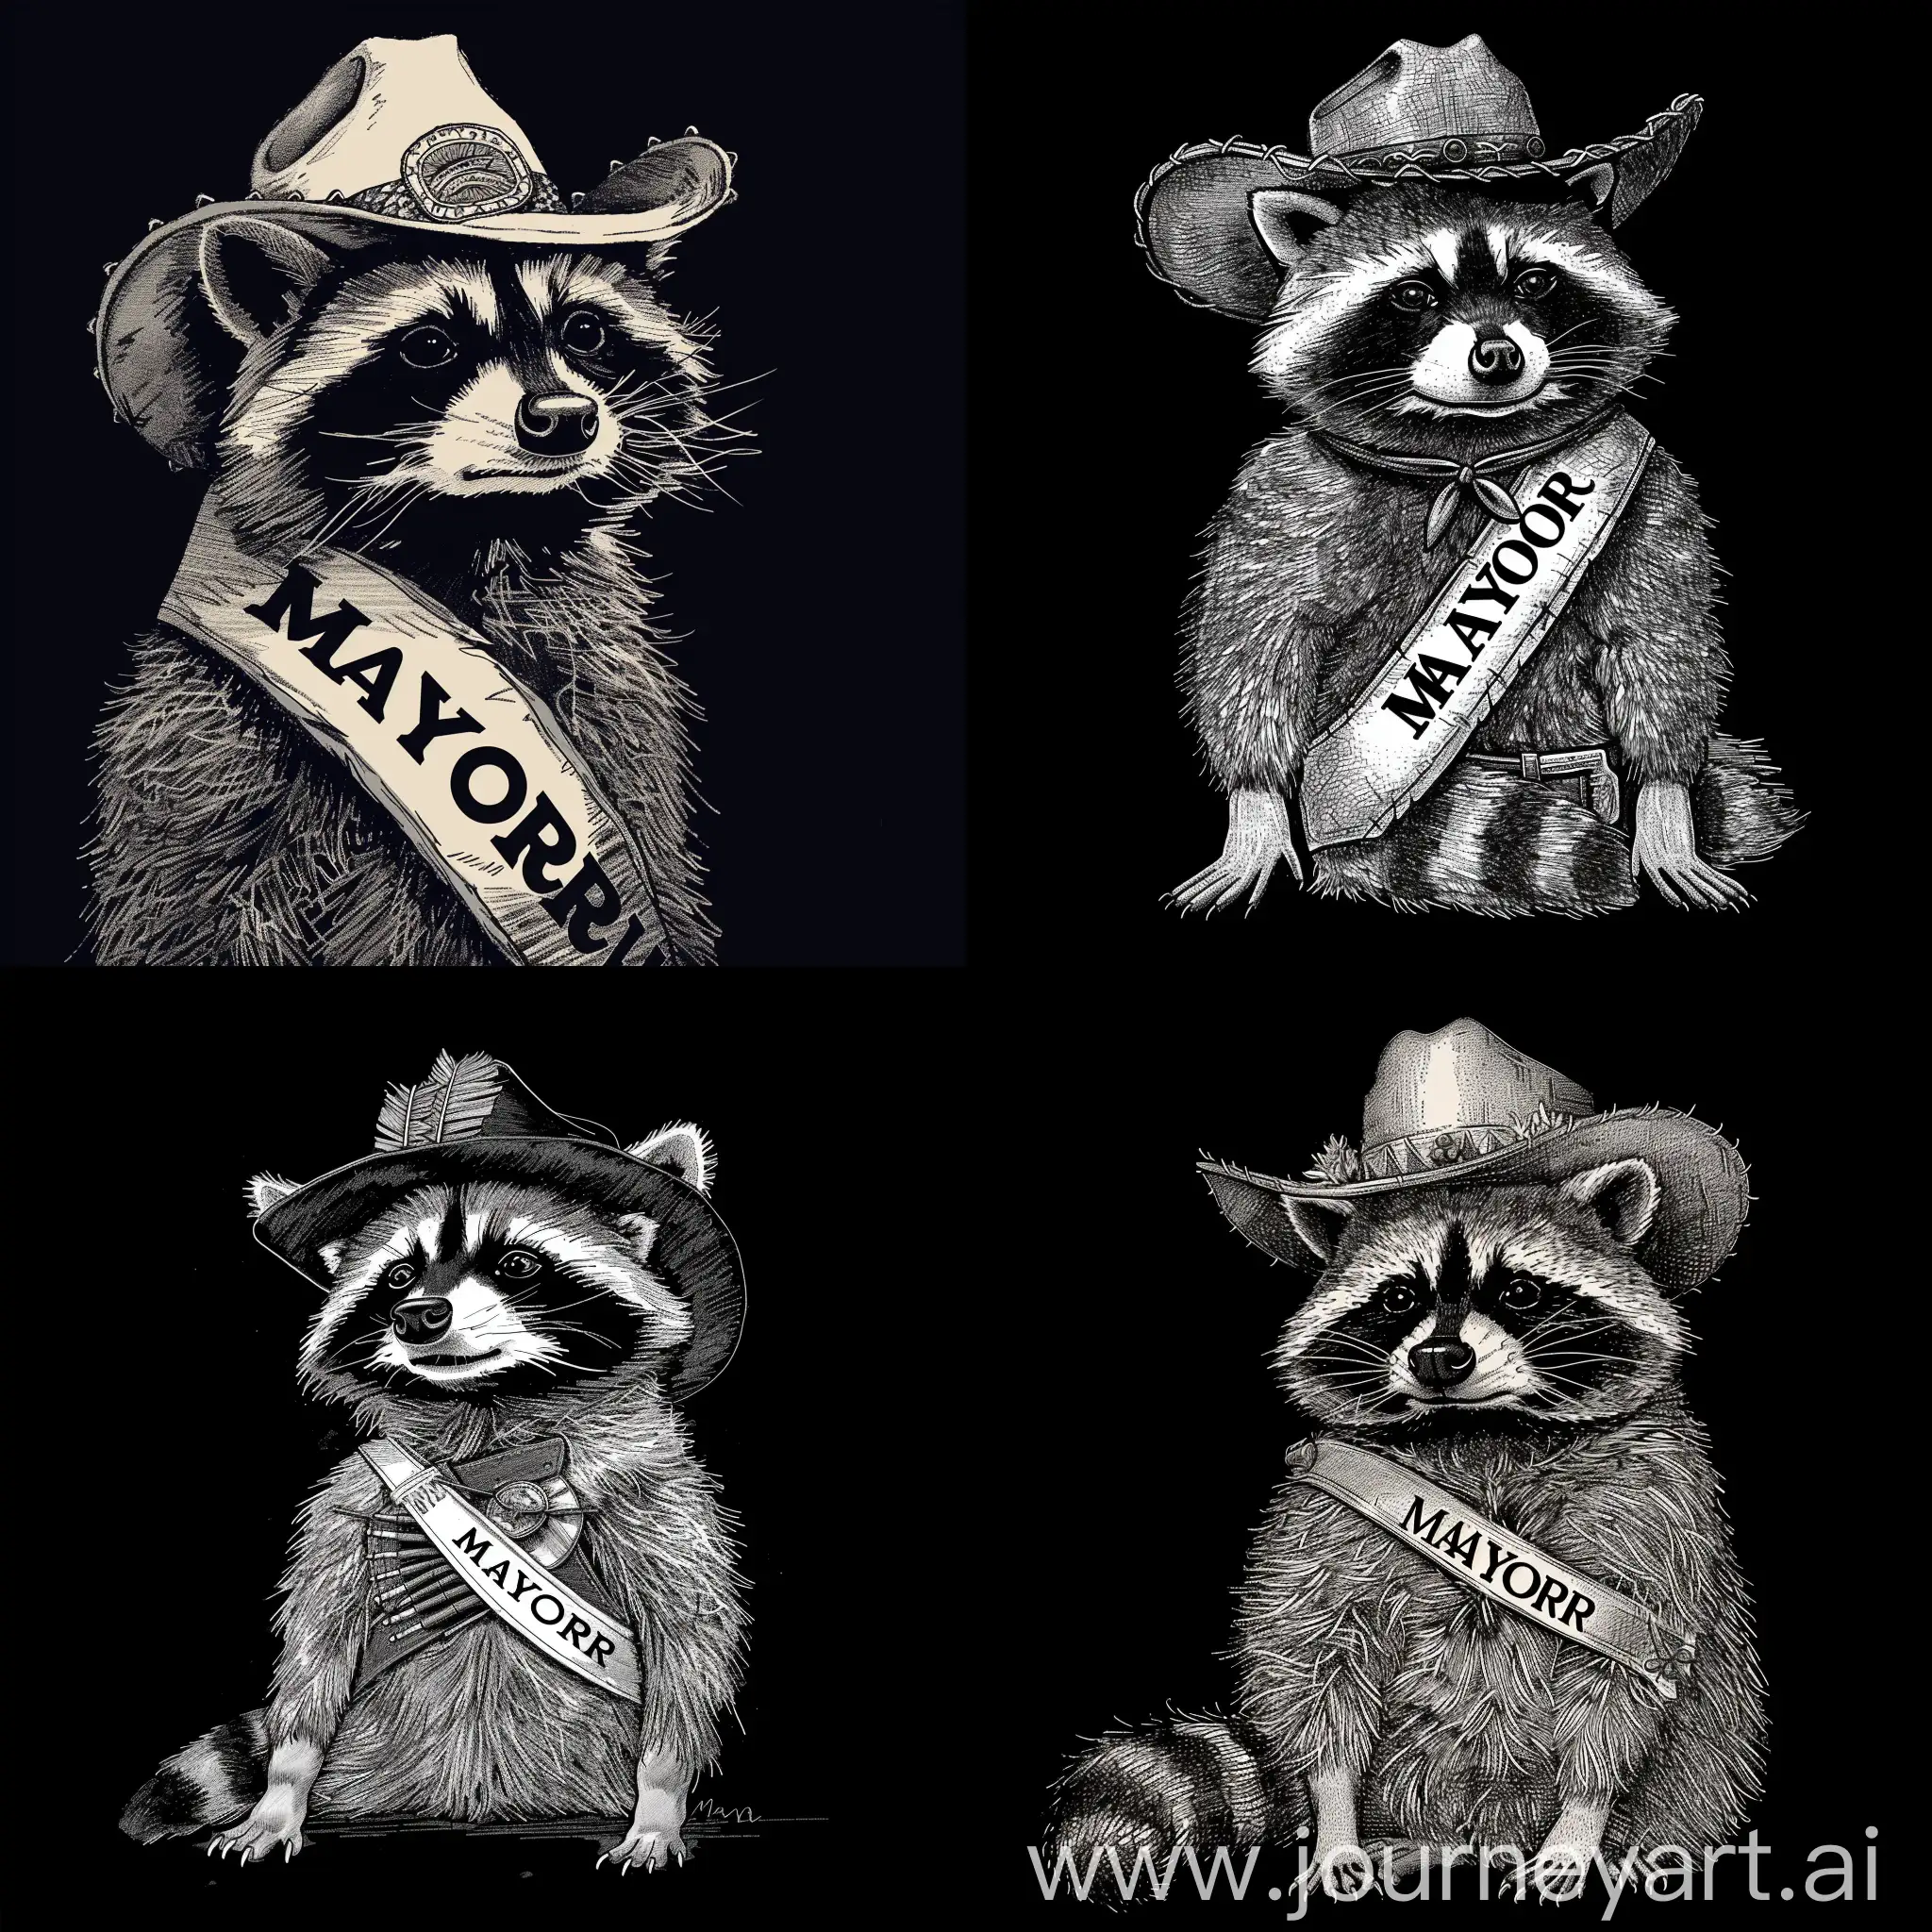 A dignified raccoon character wearing a western-style hat and a sash that says "MAYOR", with an innocent expression, posing for a promo poster. The raccoon should be cartoonish, anthropomorphic, and the drawing should have a amateur style. It should be an isolated hand-drawn sketch on a stark black background.